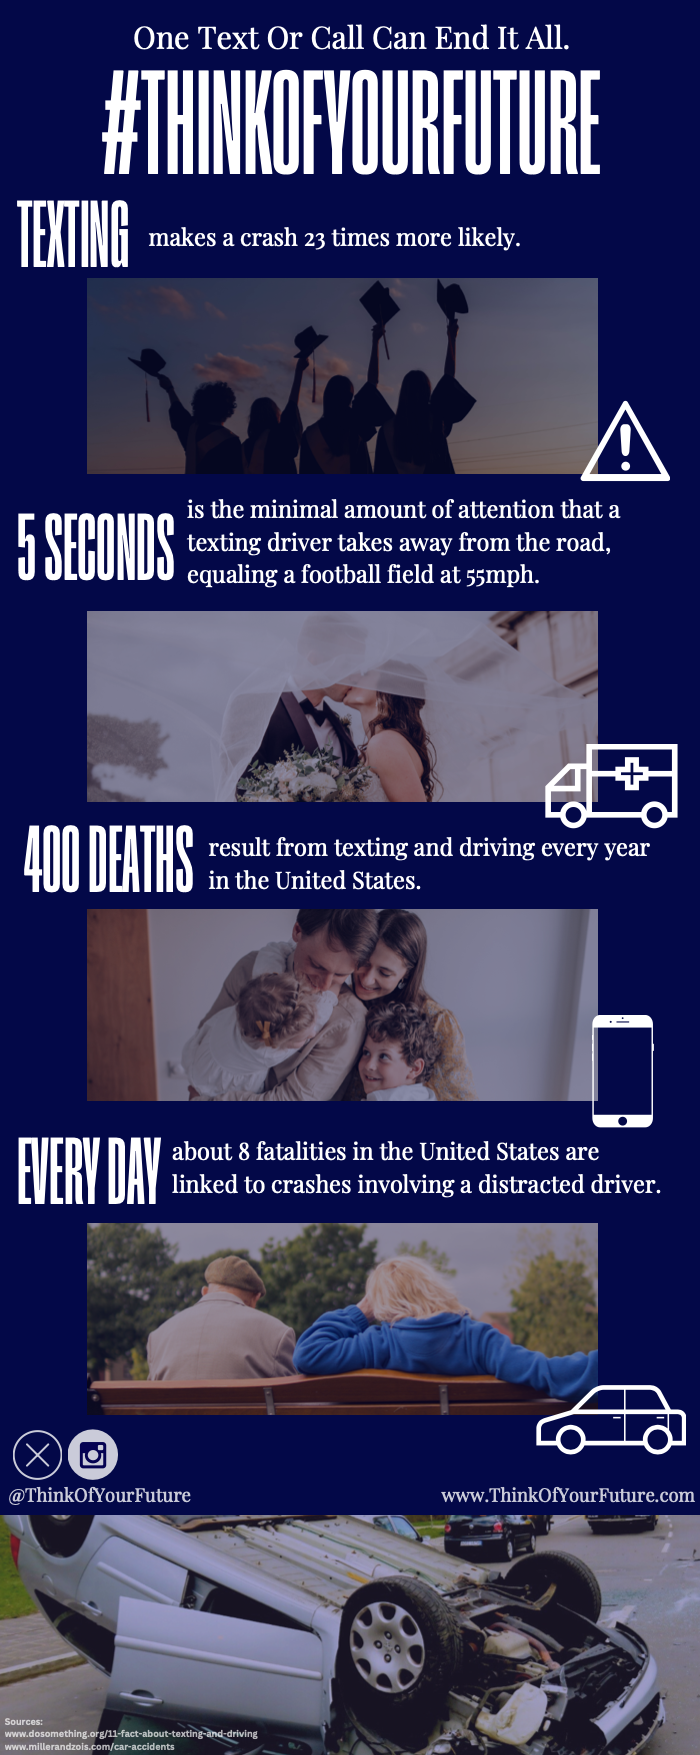 A navy blue infographic showing white text and images of life milestones such as graduation, marriage, a young family, and an elderly couple on a bench. The images are accompanied by small graphics of a hazard symbol, an ambulance, a cell phone, and a car. The image on the bottom is of a vehicle flipped over that has just been involved in. a crash. The text reads "One Text Or Call Can End It All. TEXTING makes a crash 23 times more likely. 5 SECONDS is the minimal amount of attention that a texting driver takes away from the road, equaling a football field at 55mph. 400 DEATHS result from texting and driving every year in the United States. EVERY DAY about 8 fatalities in the Unites States are linked to crashes involving a distracted driver. INSTAGRAM AND X LOGO: @ThinkOfYourFuture www.ThinkOfYourFuture.com". 